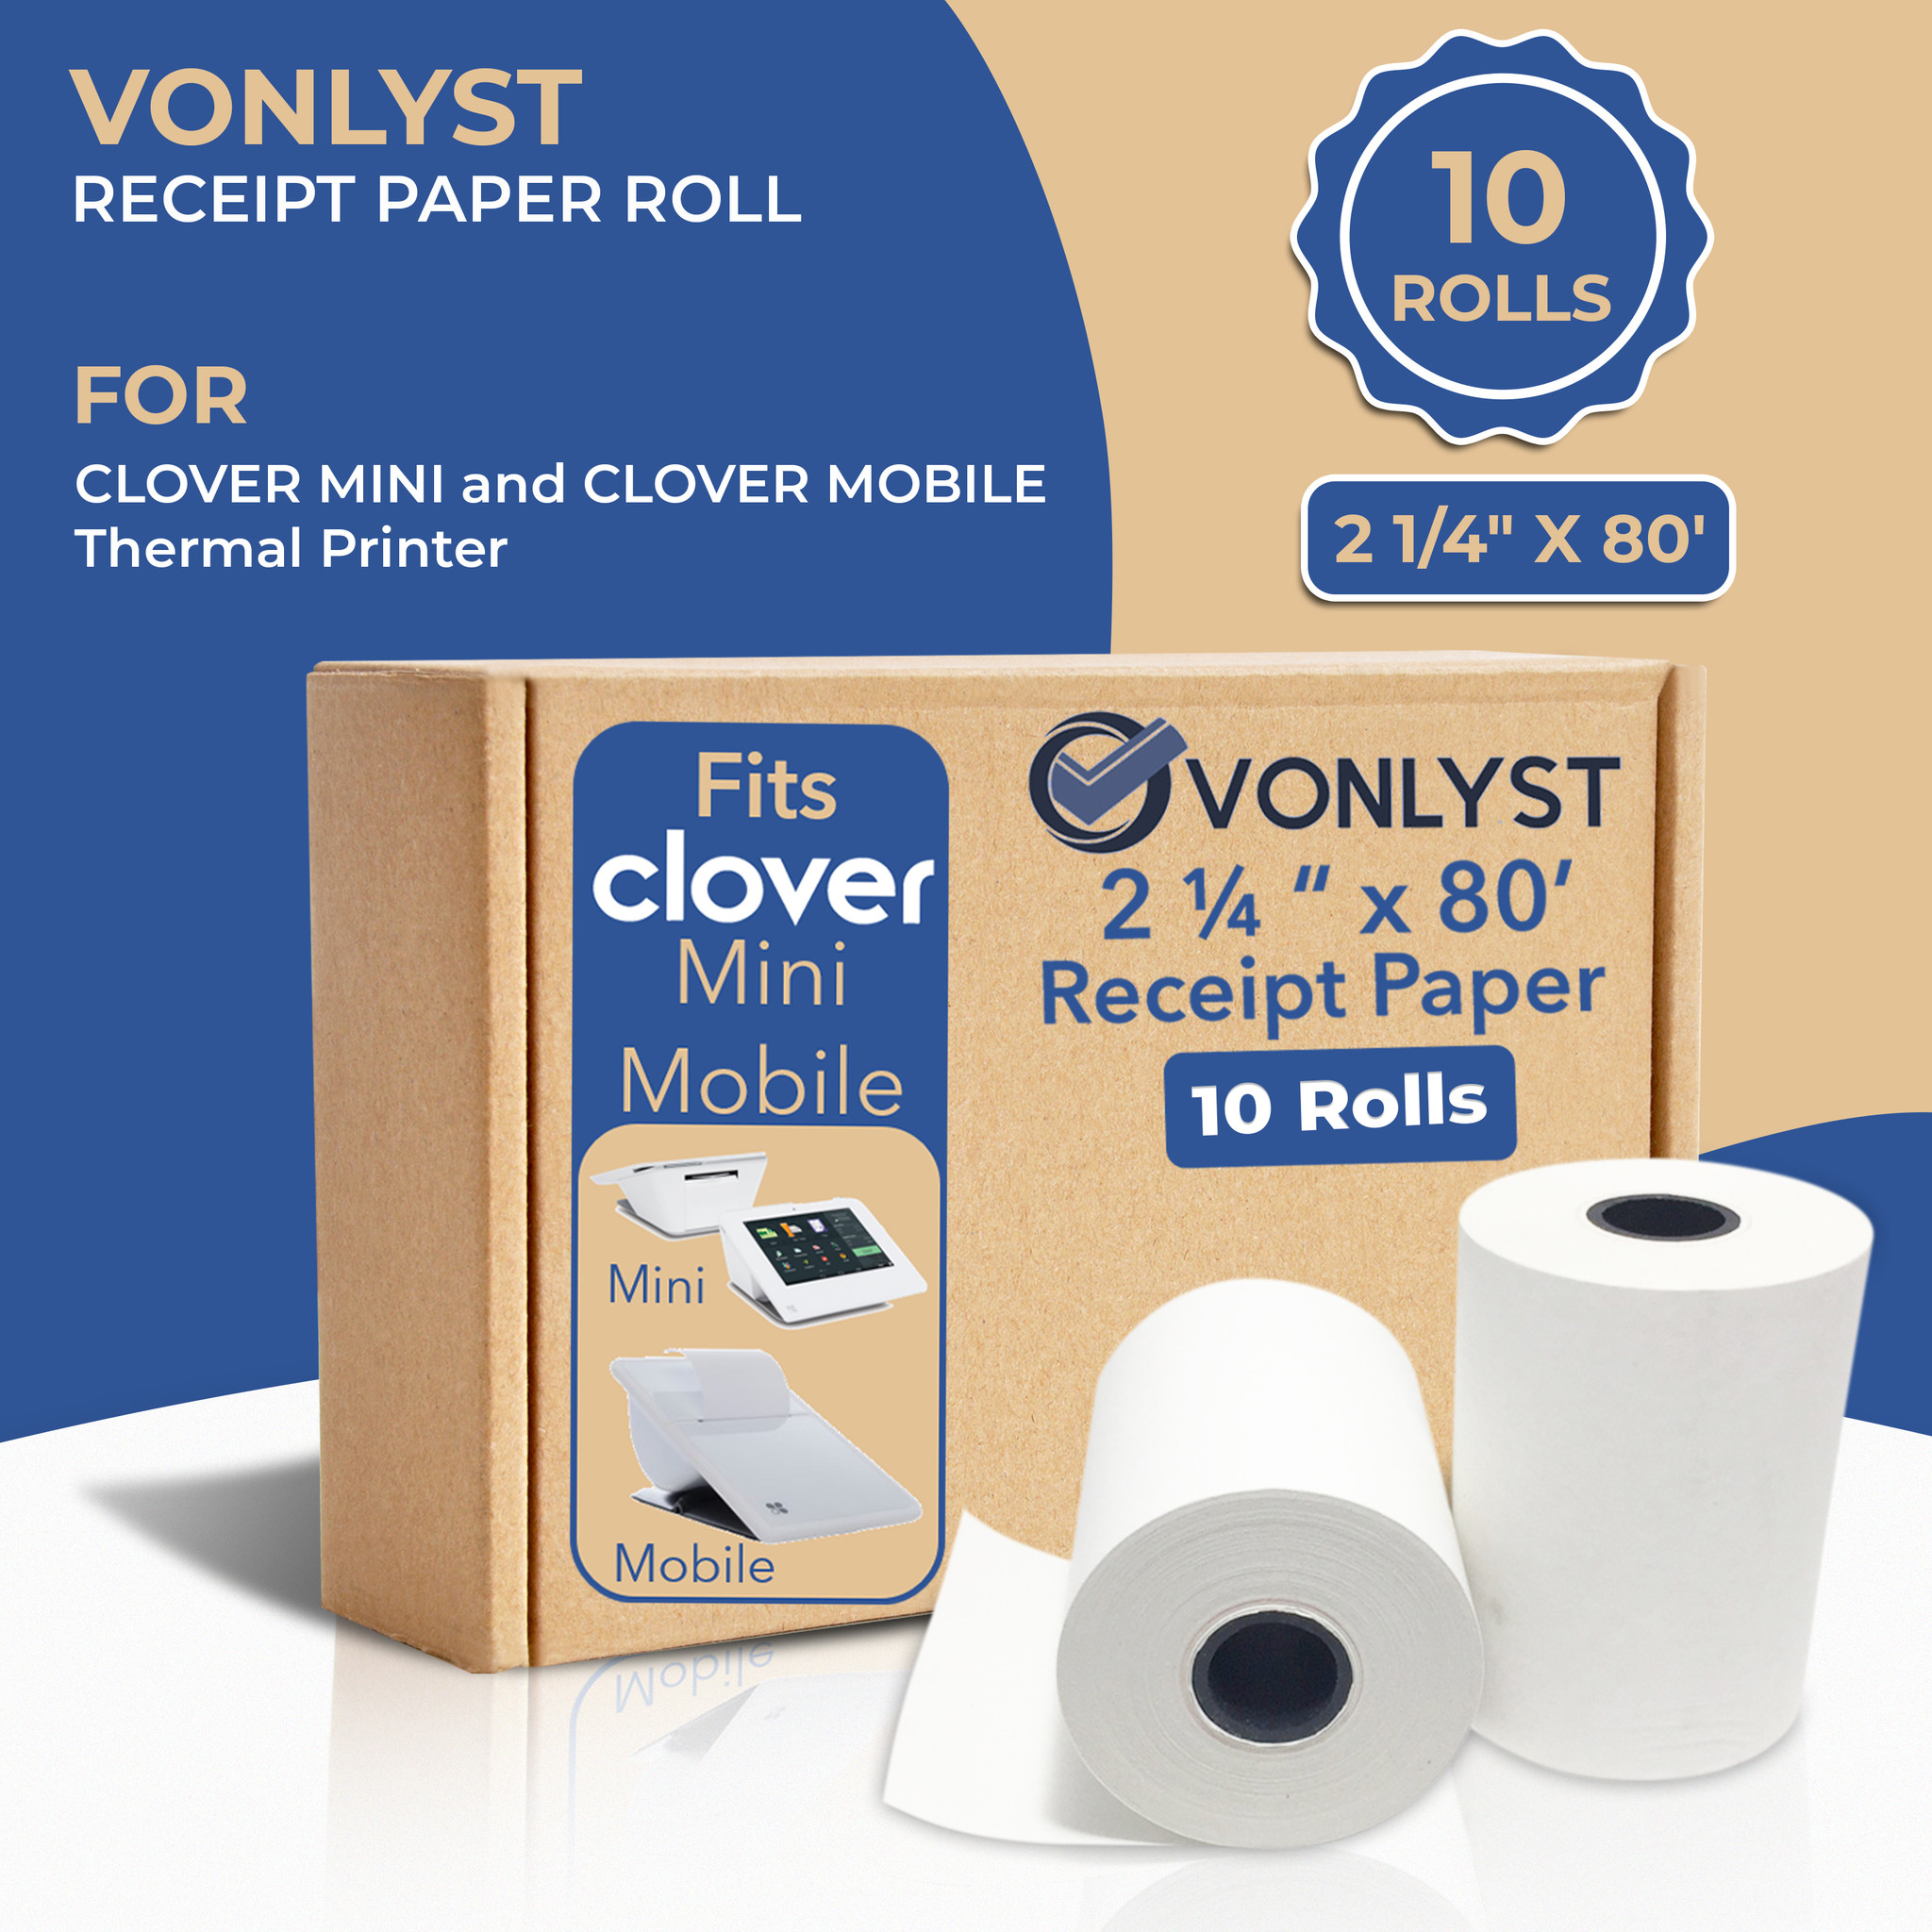 Epson Thermal Receipt Paper roll 3 1 8' x 230 - Box with 48 - Vonlyst